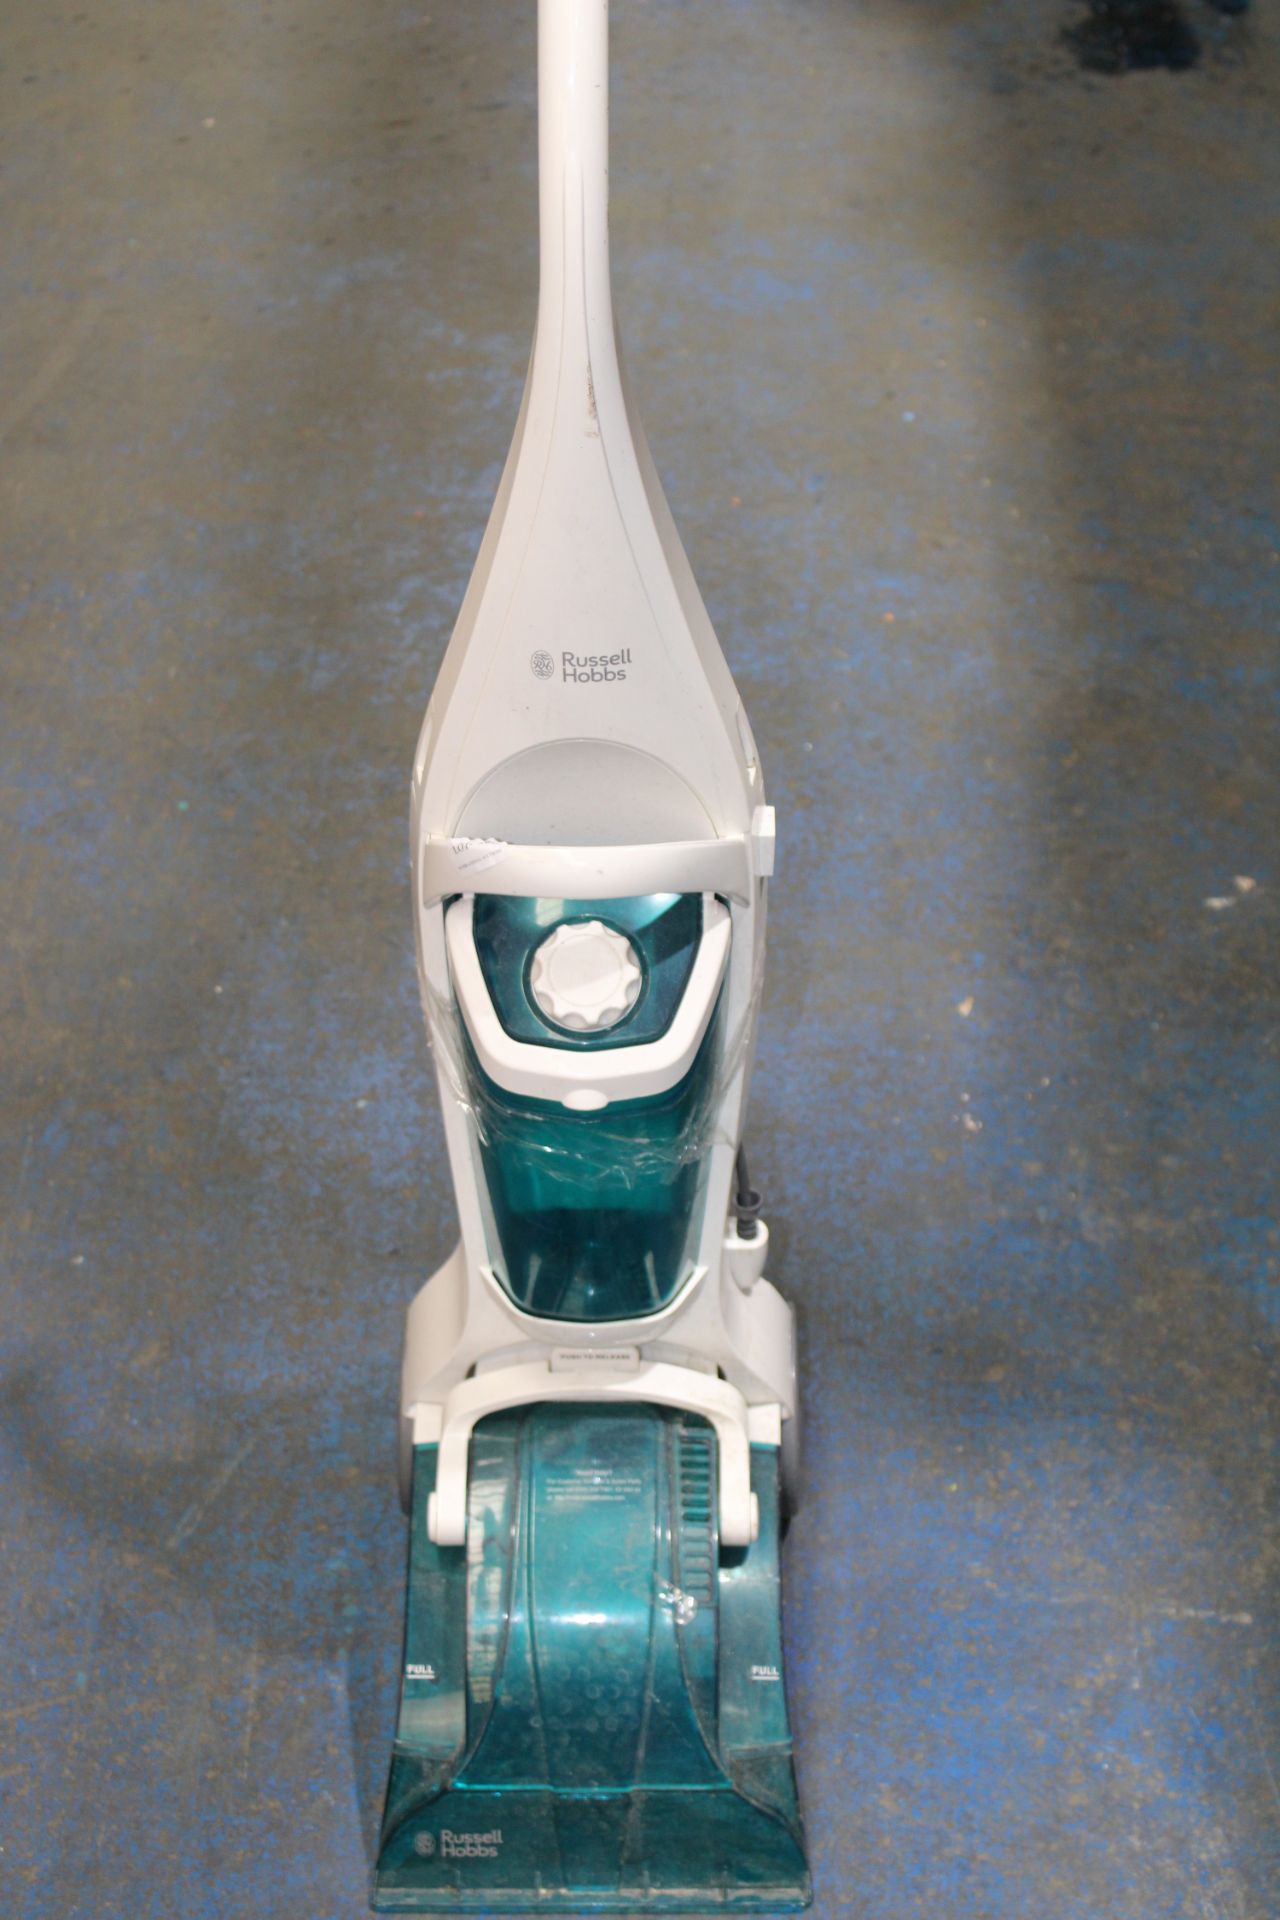 UNBOXED RUSSELL HOBBS UPRIGHT CARPET WASHER Condition ReportAppraisal Available on Request- All